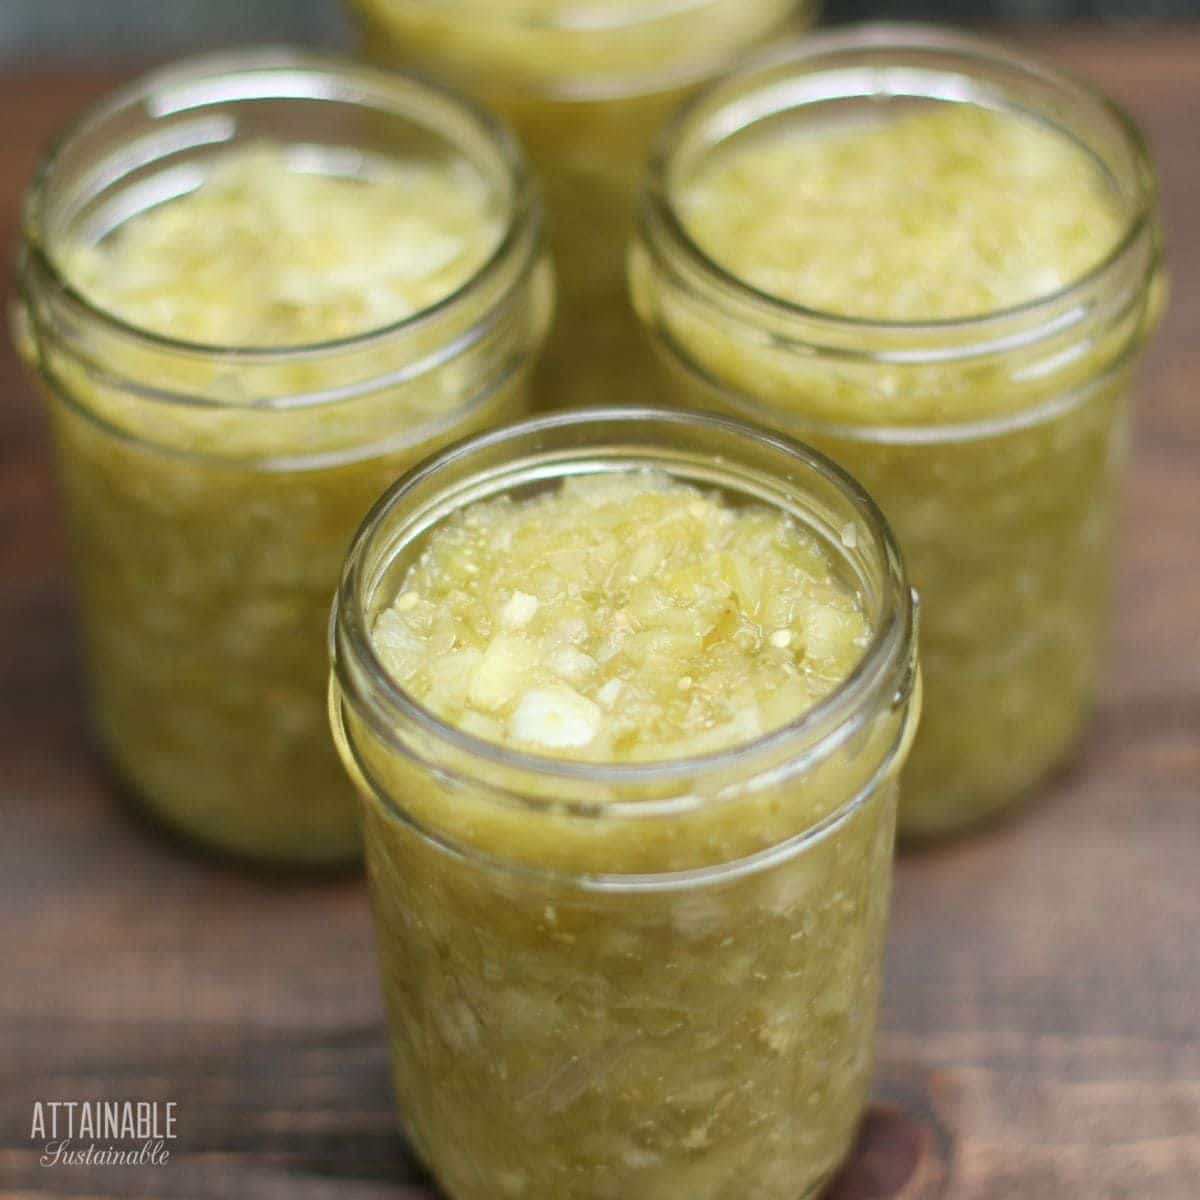 Chow chow green tomato relish canned in glass jars.